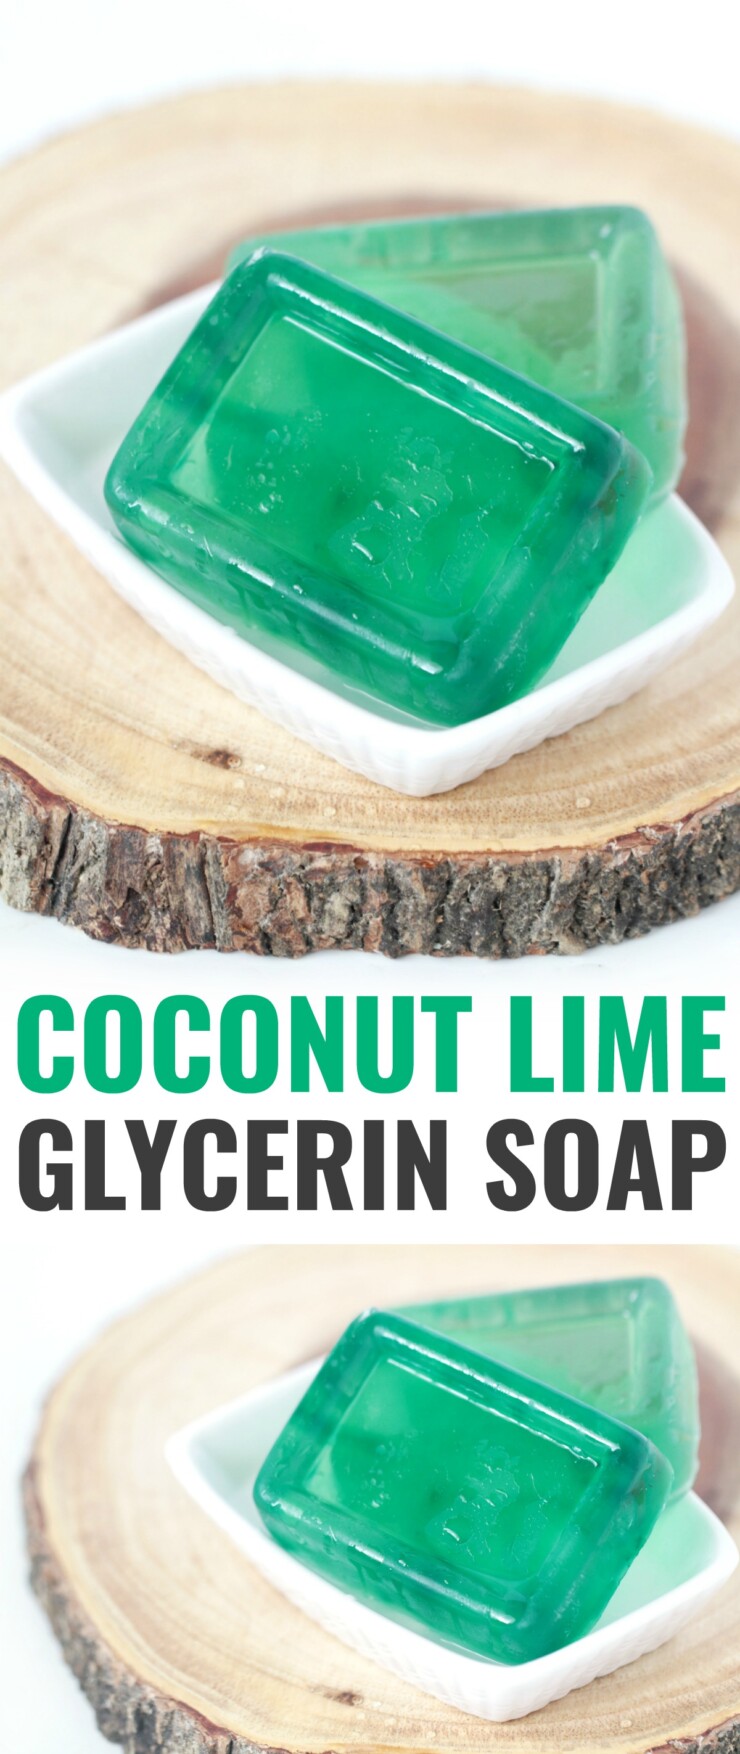 This Coconut Lime Glycerin Soap features a perfect blend of Coconut and Lime that screams of a refreshing tropical summer! Hints of coconut with the tart and tang scent of lime will whisk you away to paradise.